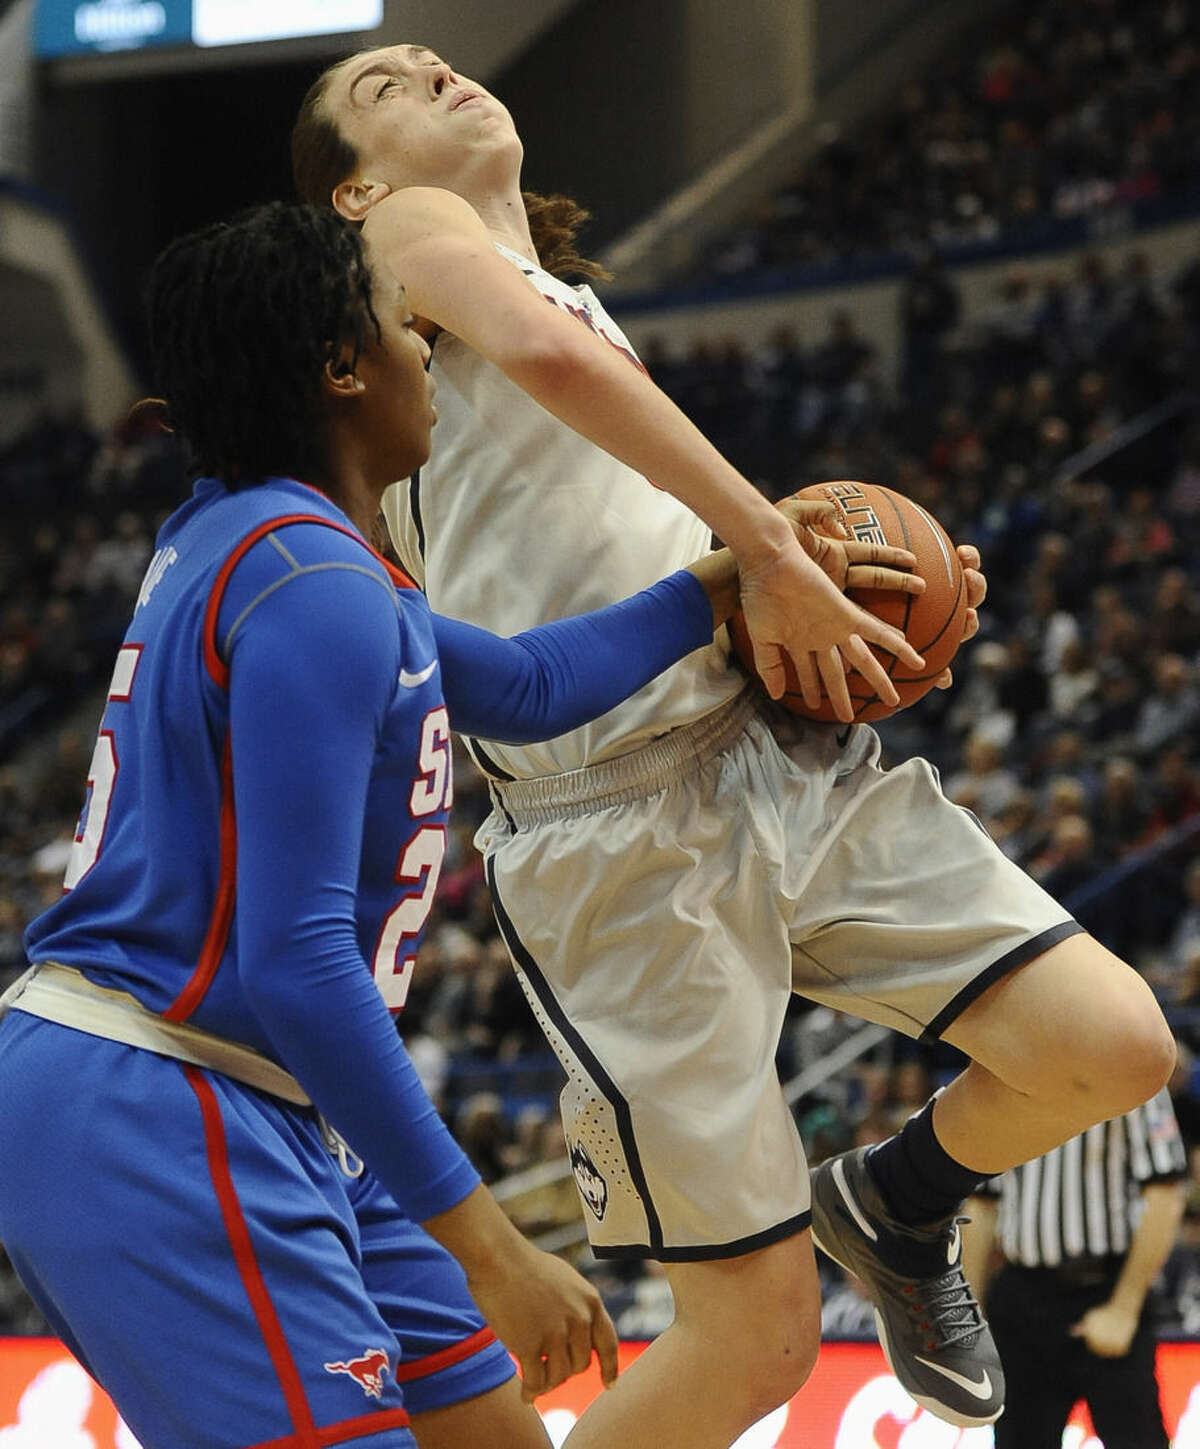 SMU’s Taylor Brame, left, fouls Connecticut’s Breanna Stewart, right, during the first half of an NCAA college basketball game, Saturday, Dec. 27, 2014, in Hartford, Conn. (AP Photo/Jessica Hill)